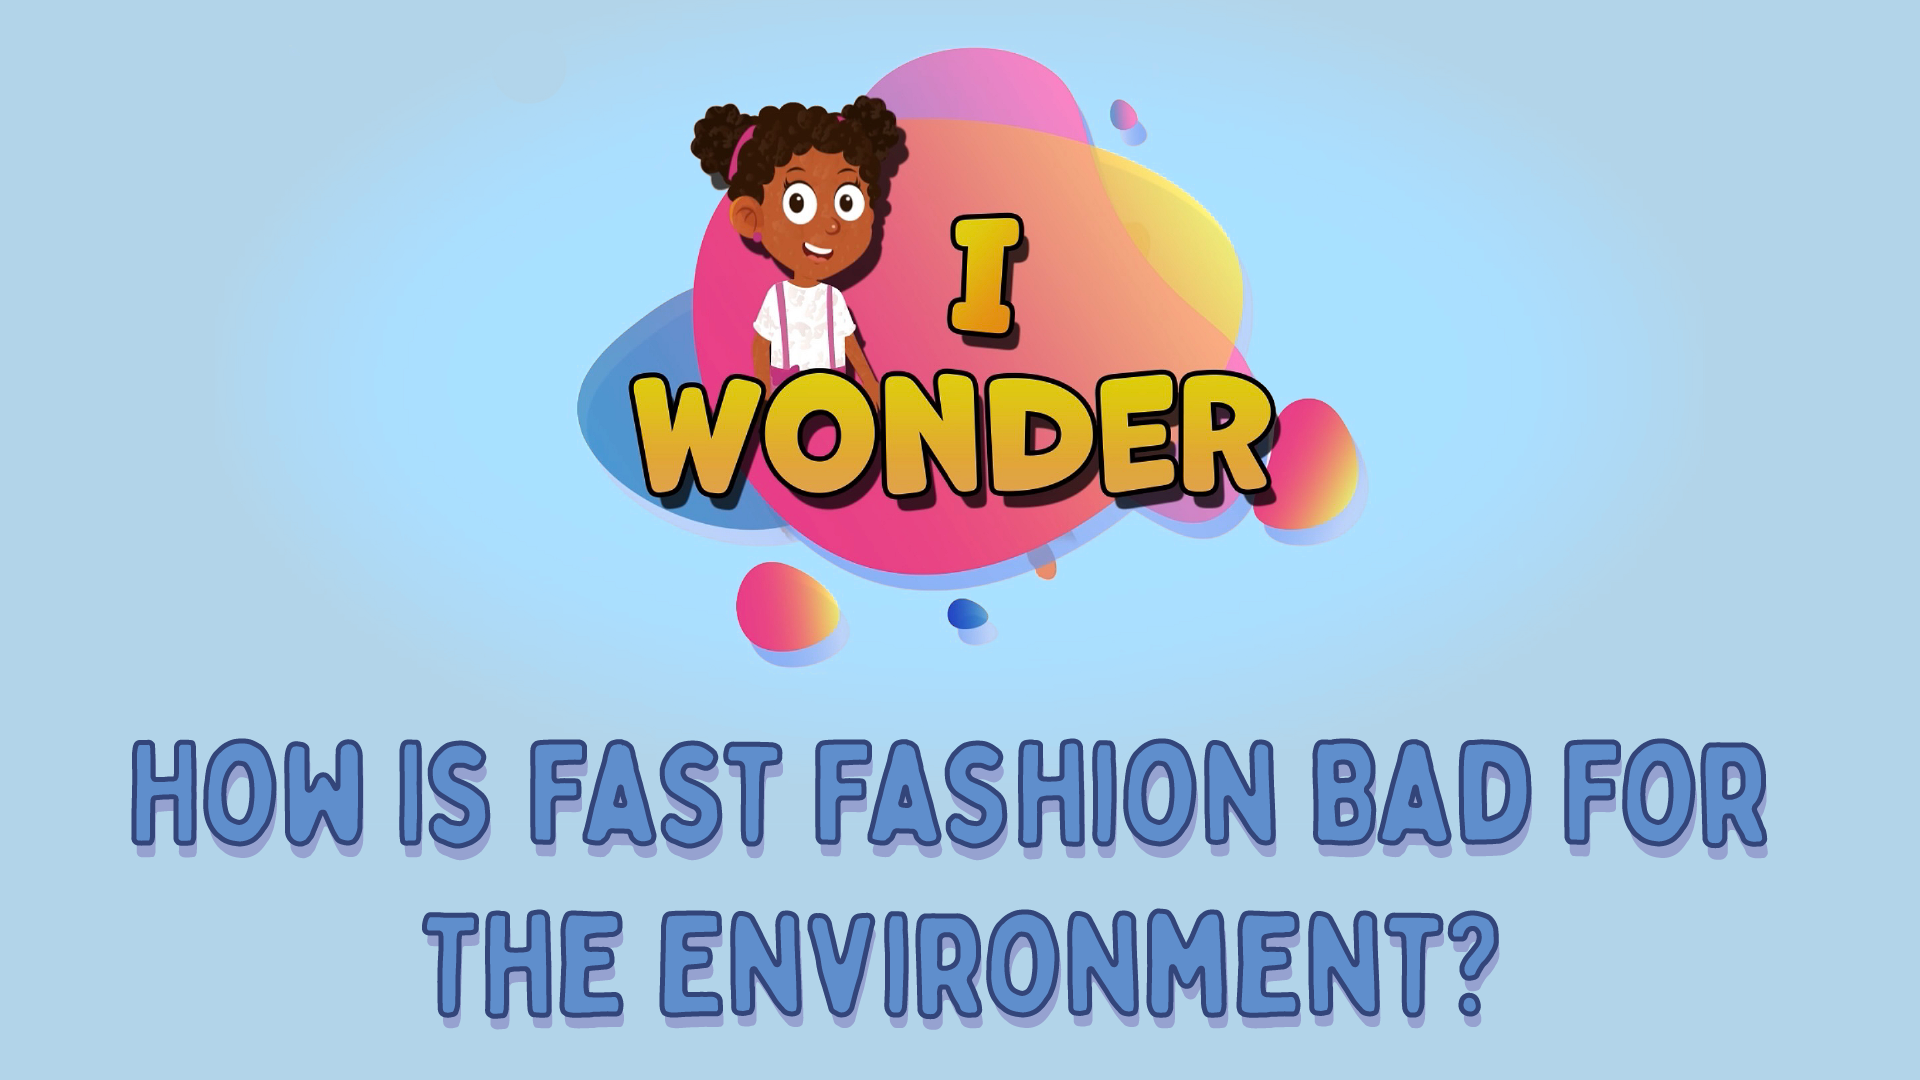 How Is Fast Fashion Bad For The Environment?